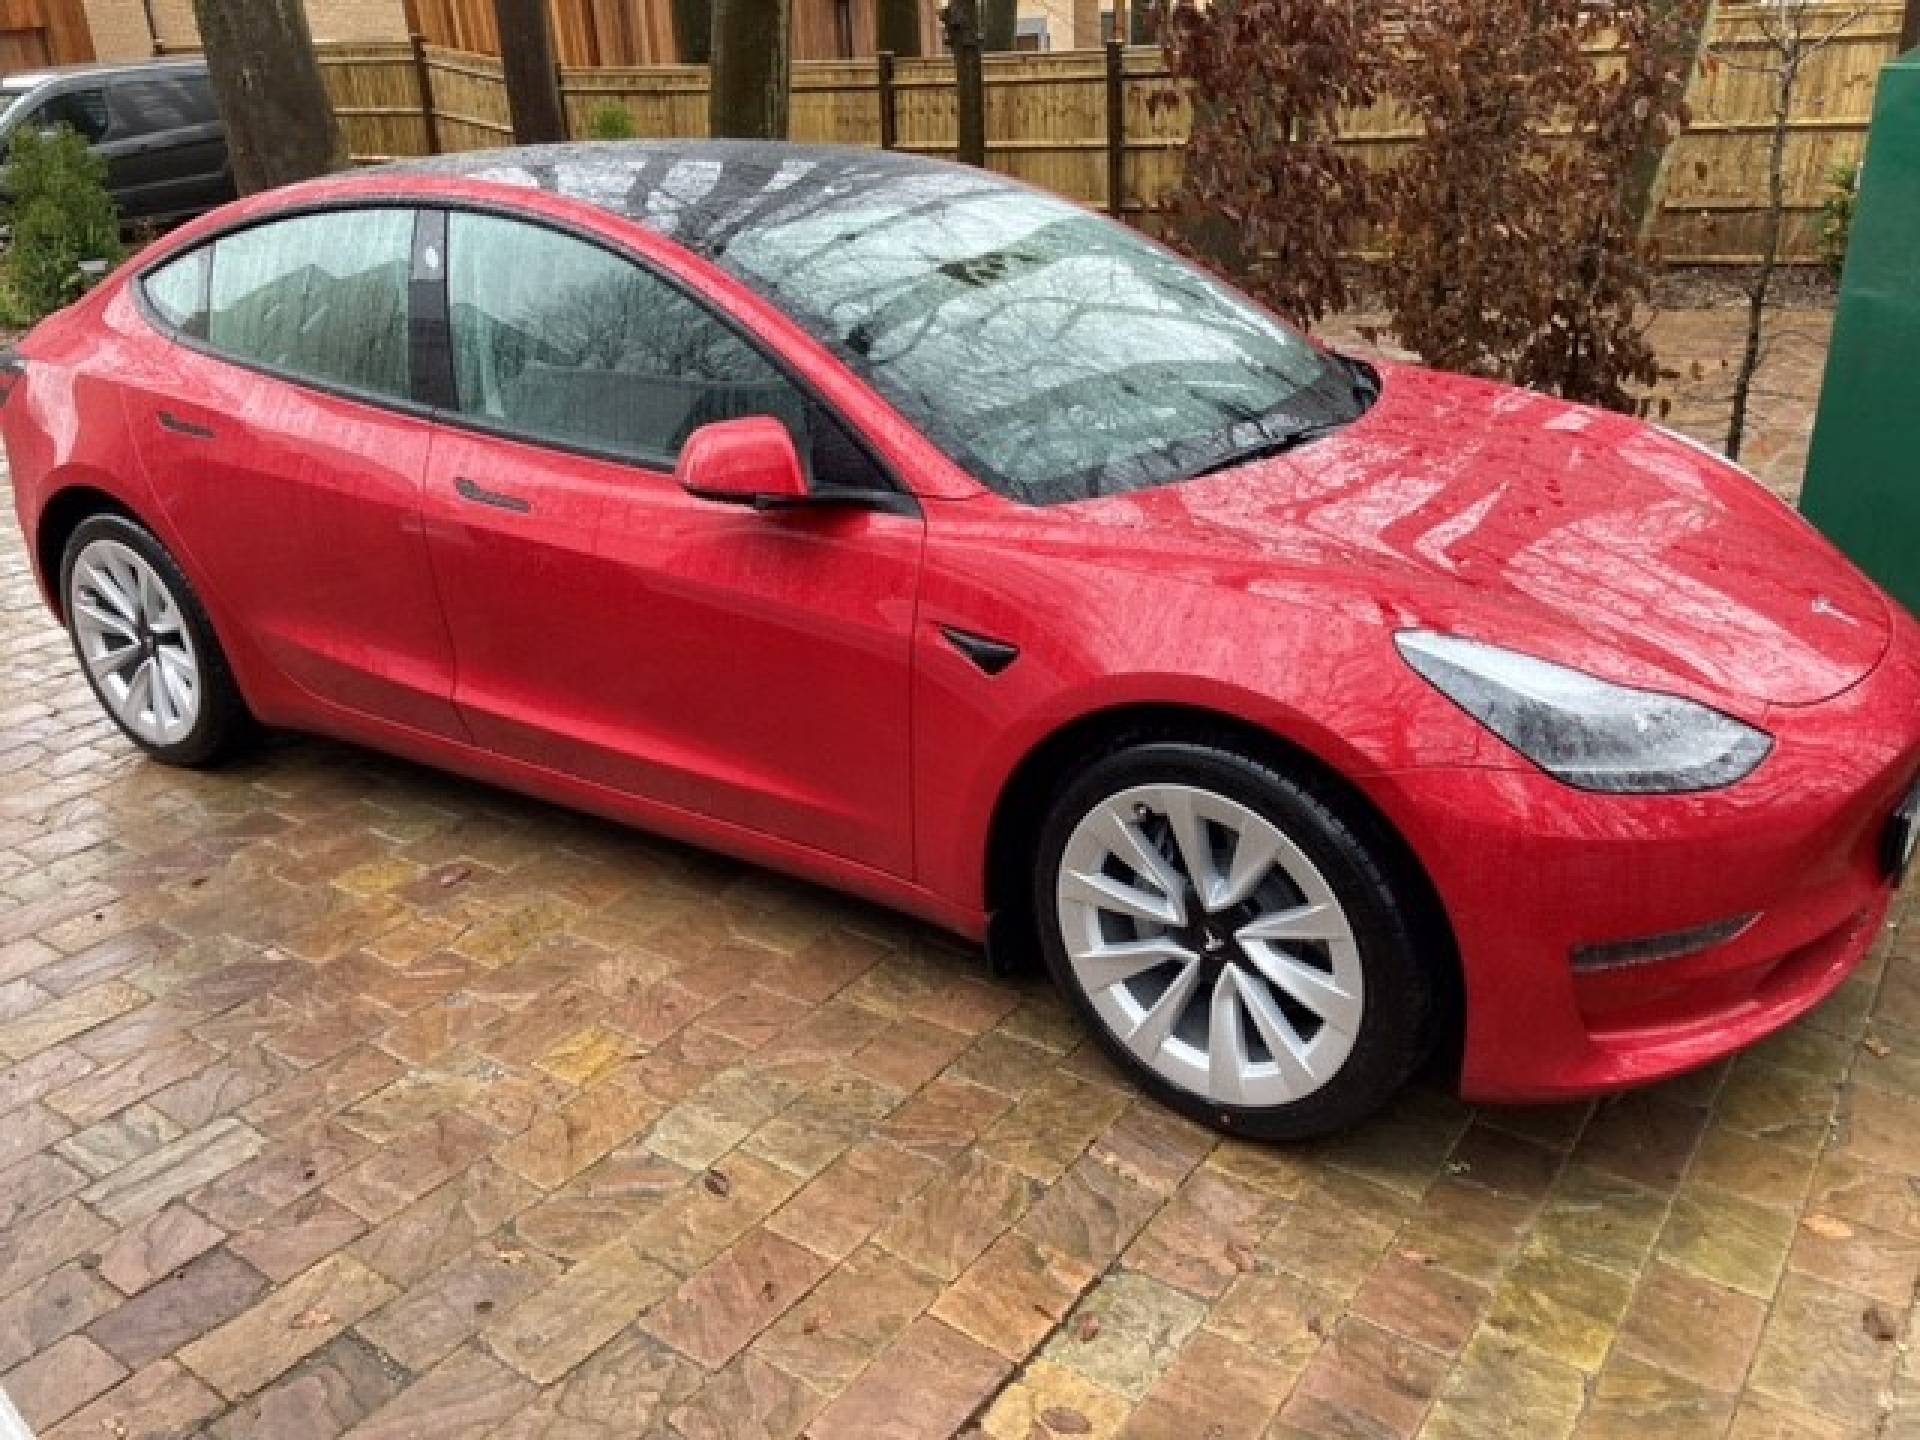 Charging a new Tesla lease car